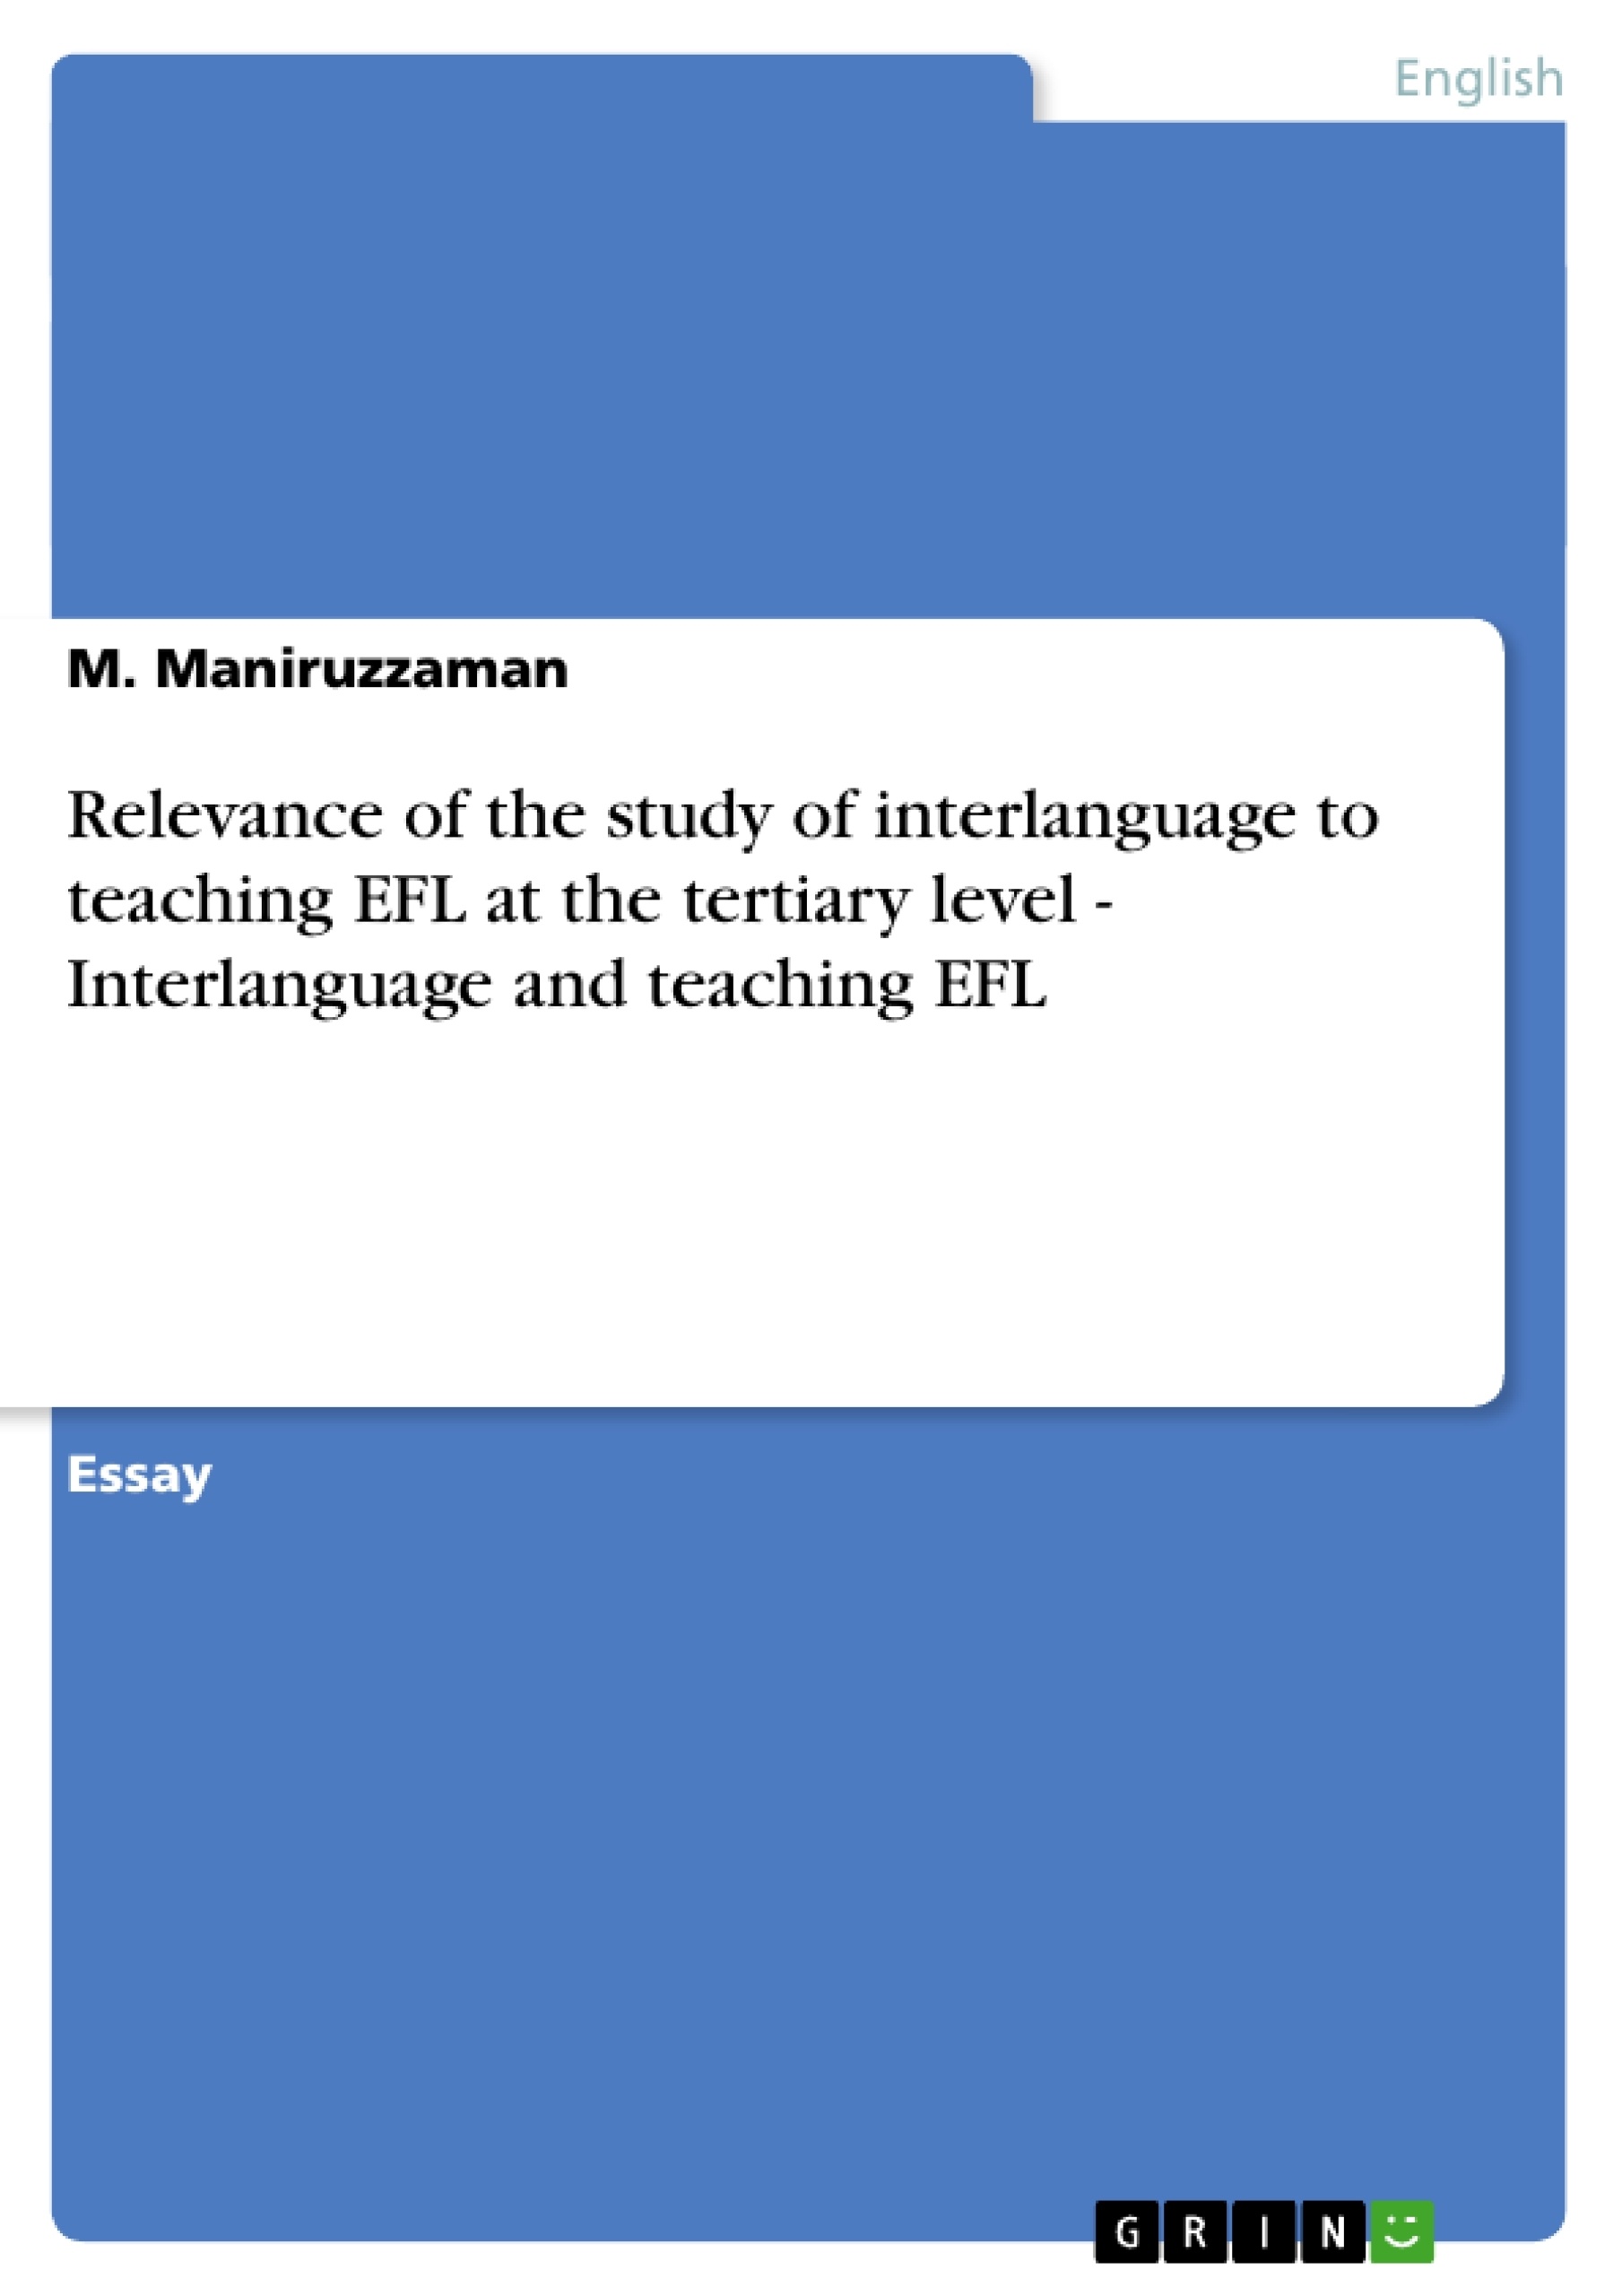 level　and　the　the　Relevance　study　at　of　EFL　teaching　to　of　interlanguage　GRIN　teaching　tertiary　Interlanguage　EFL